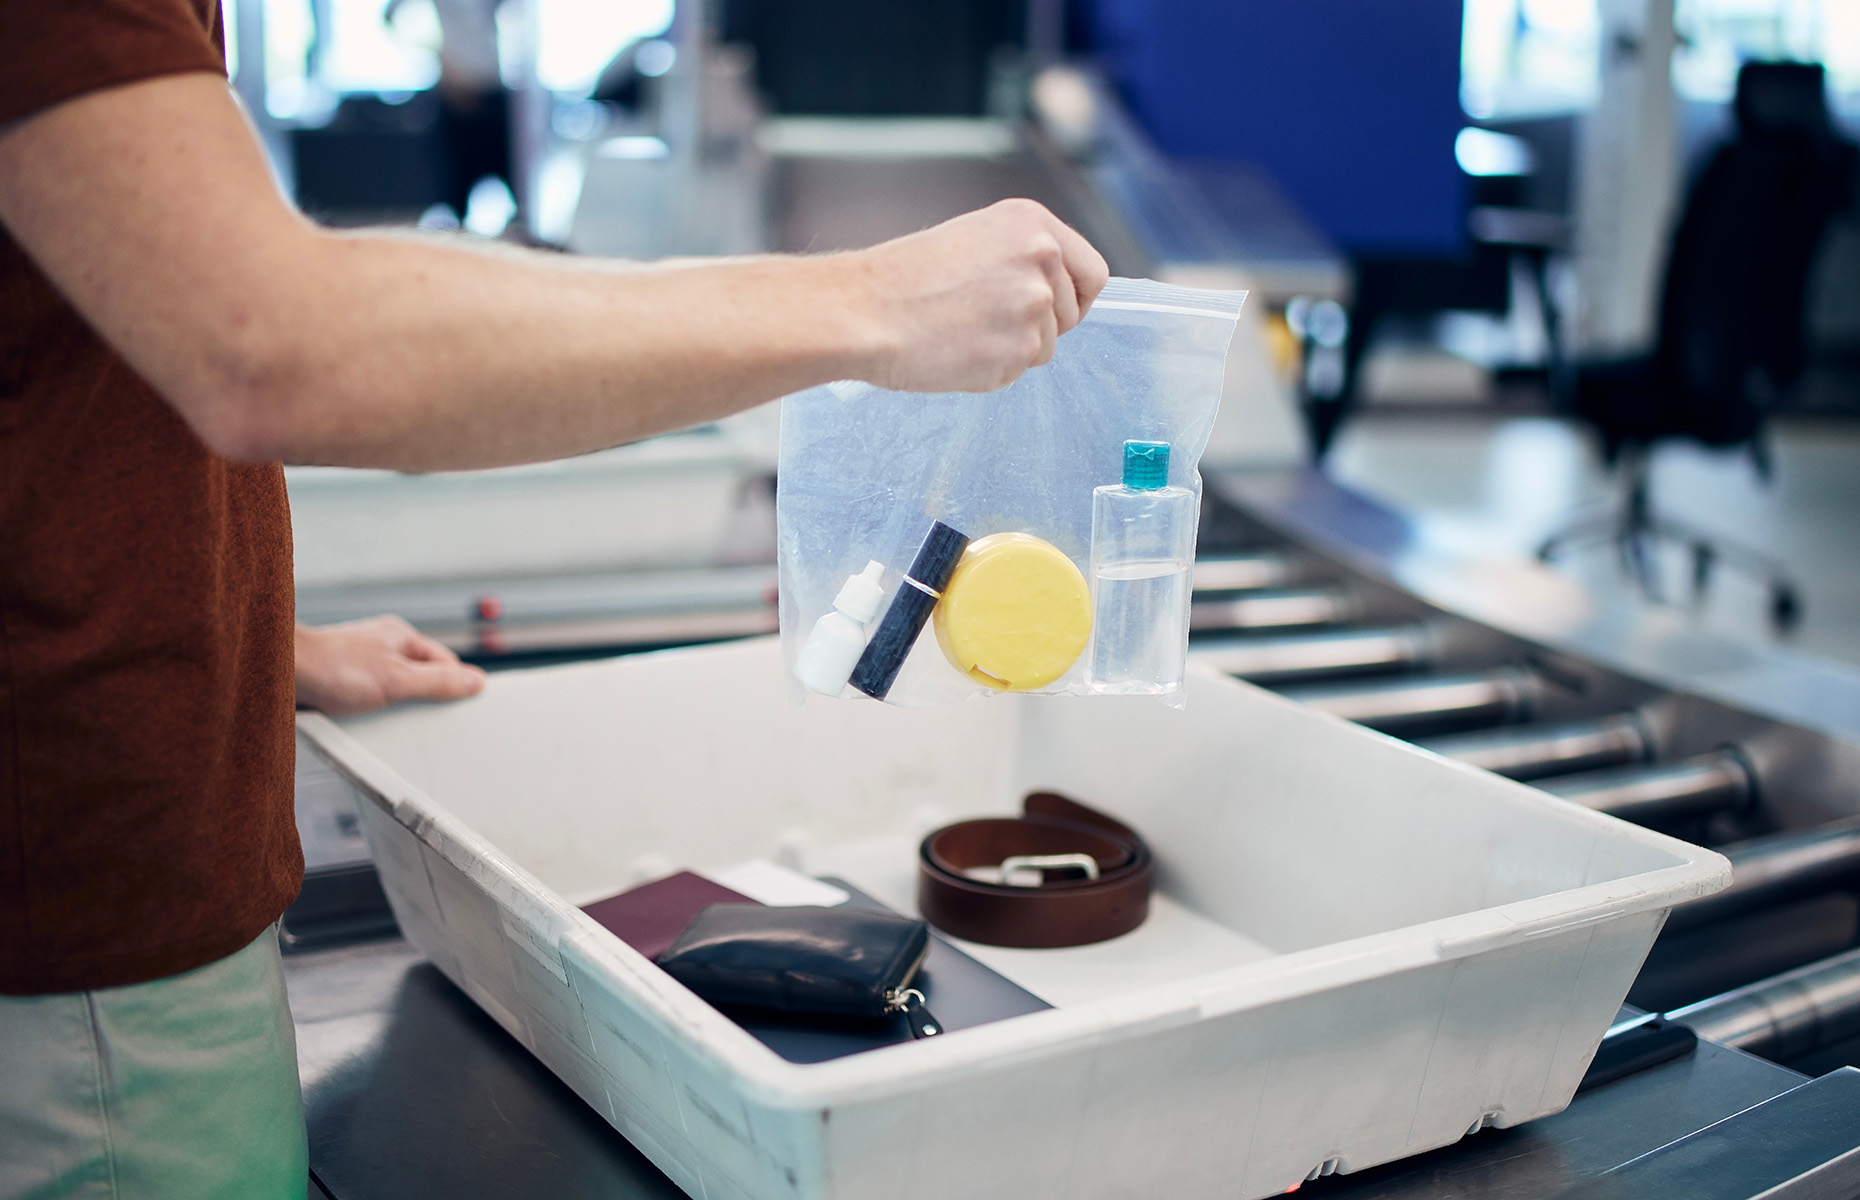 Items in tray for airport security (Image: Jaromir Chalabala/Shutterstock)